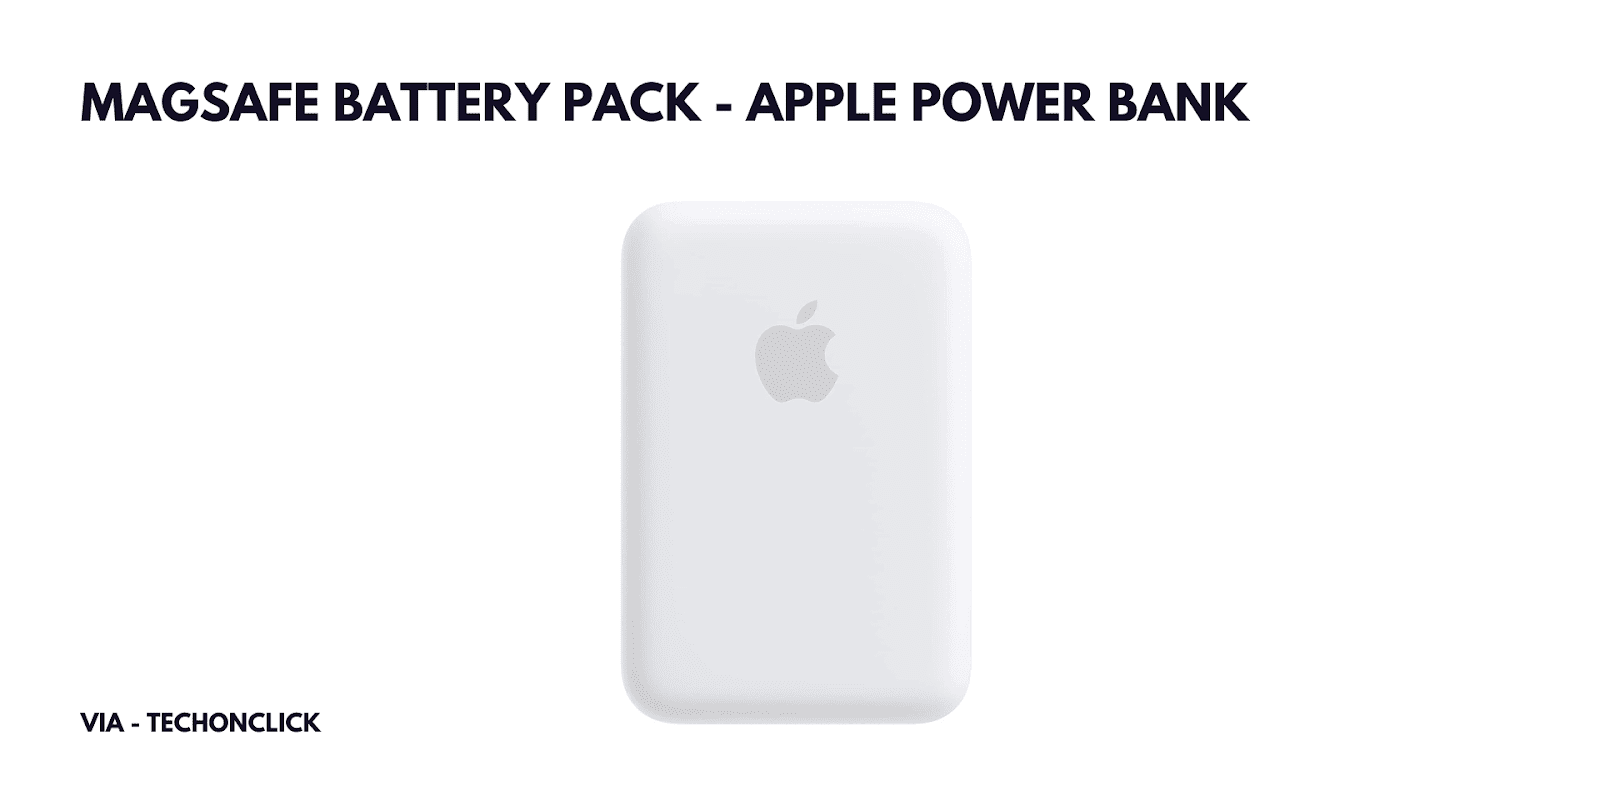 MagSafe Battery Pack - Apple Power Bank - Best Products for Apple Users